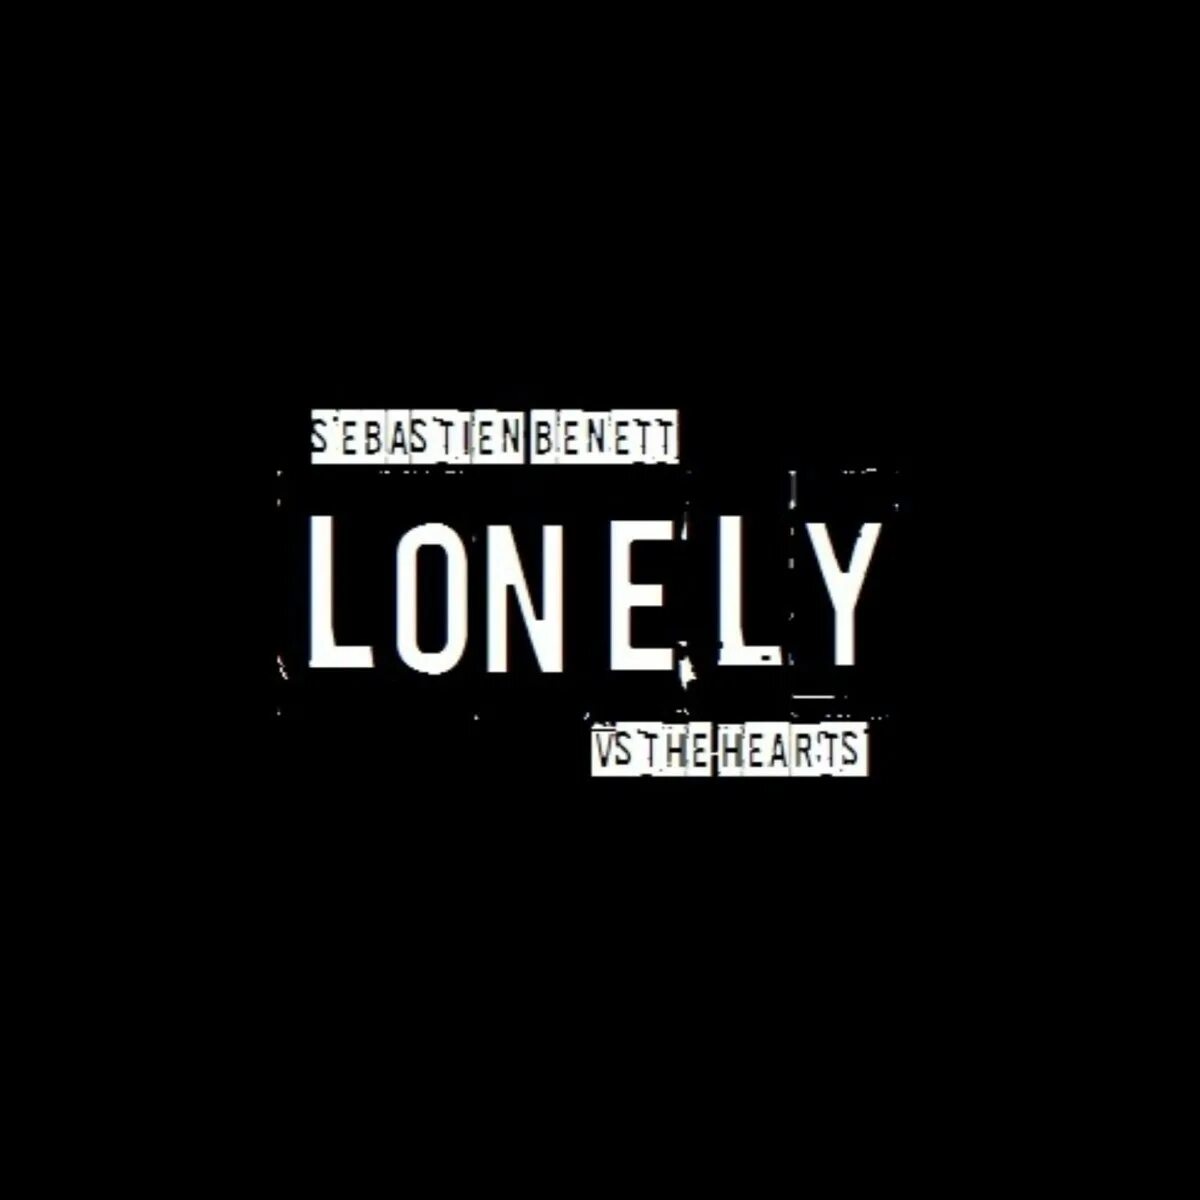 Txt lonely. Lonely надпись. Лонли. Lonely текст картинка. Lonely певец.